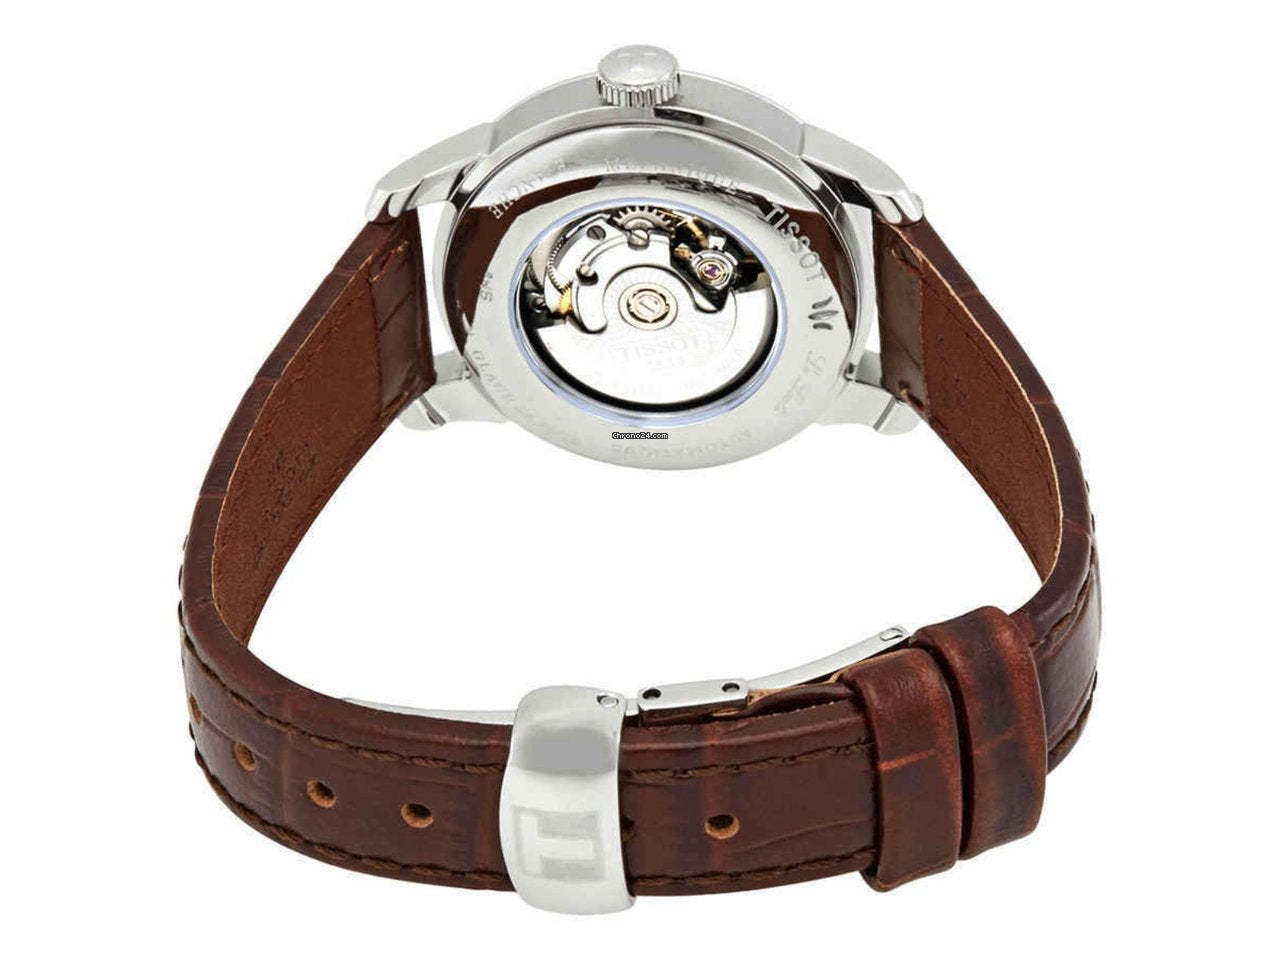 Tissot T Classic Le Locle Automatic Silver Dial Brown Leather Strap Watch For Women - T006.207.16.038.00